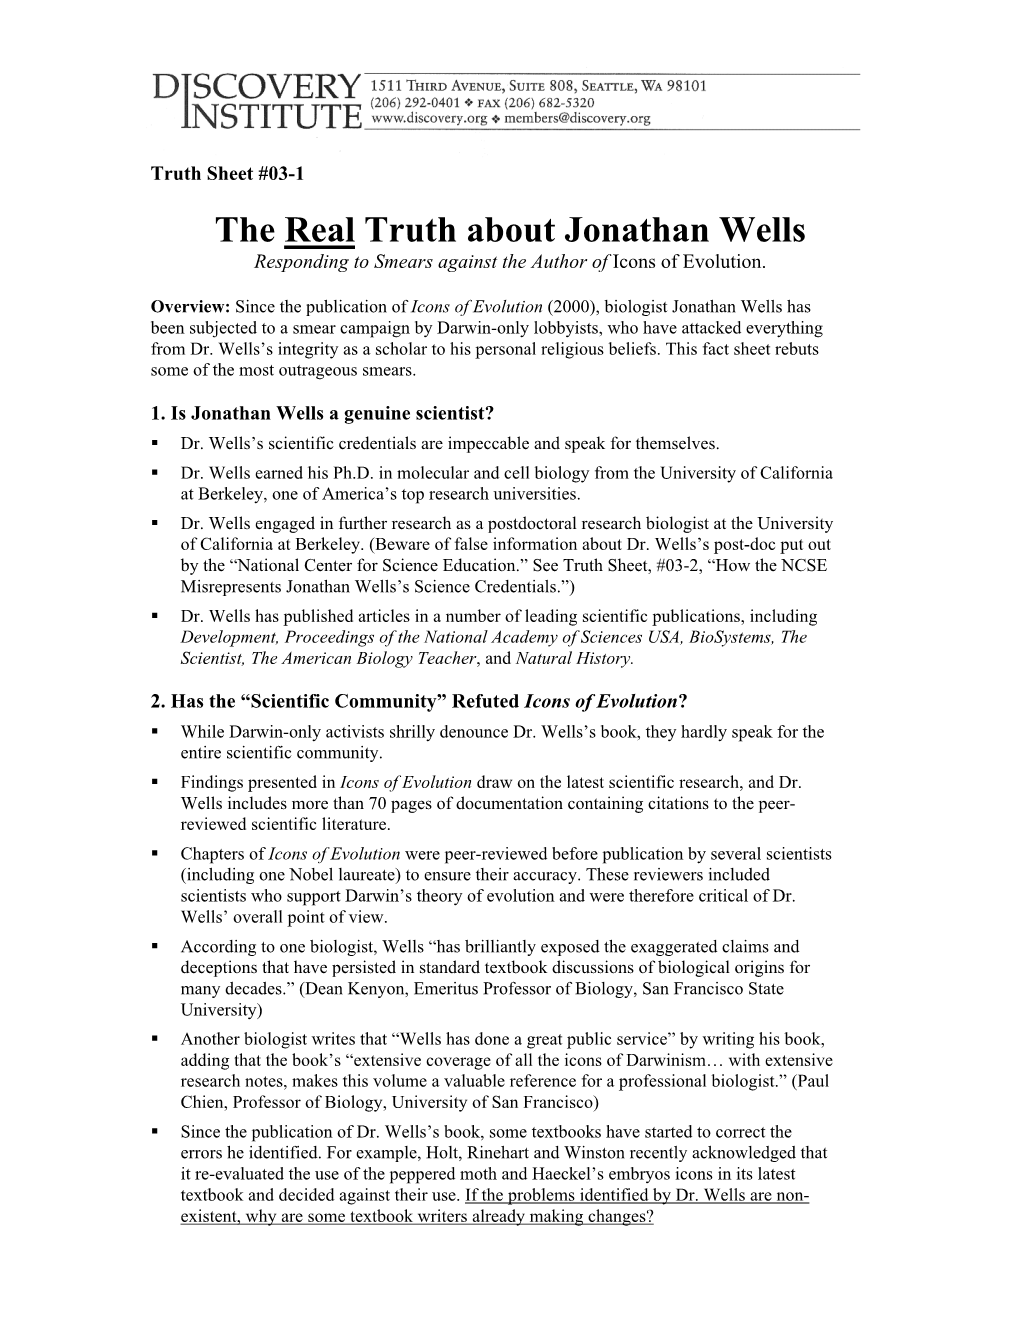 The Real Truth About Jonathan Wells Responding to Smears Against the Author of Icons of Evolution